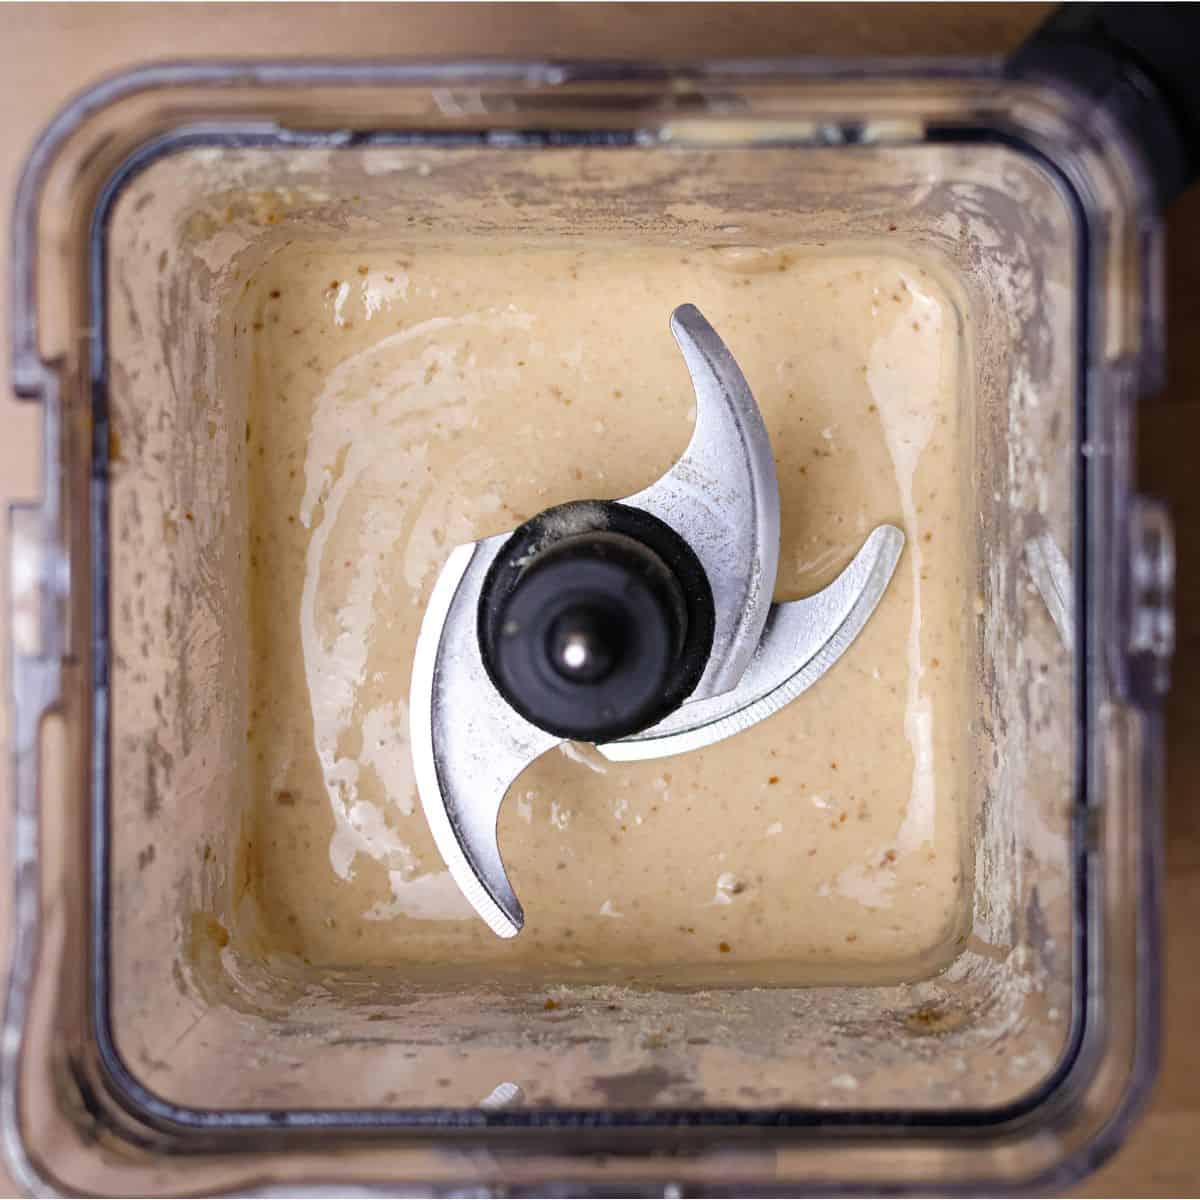 Top view of a creamy, light beige smoothie in a blender, showing a smooth and thick texture after adjusting the consistency.